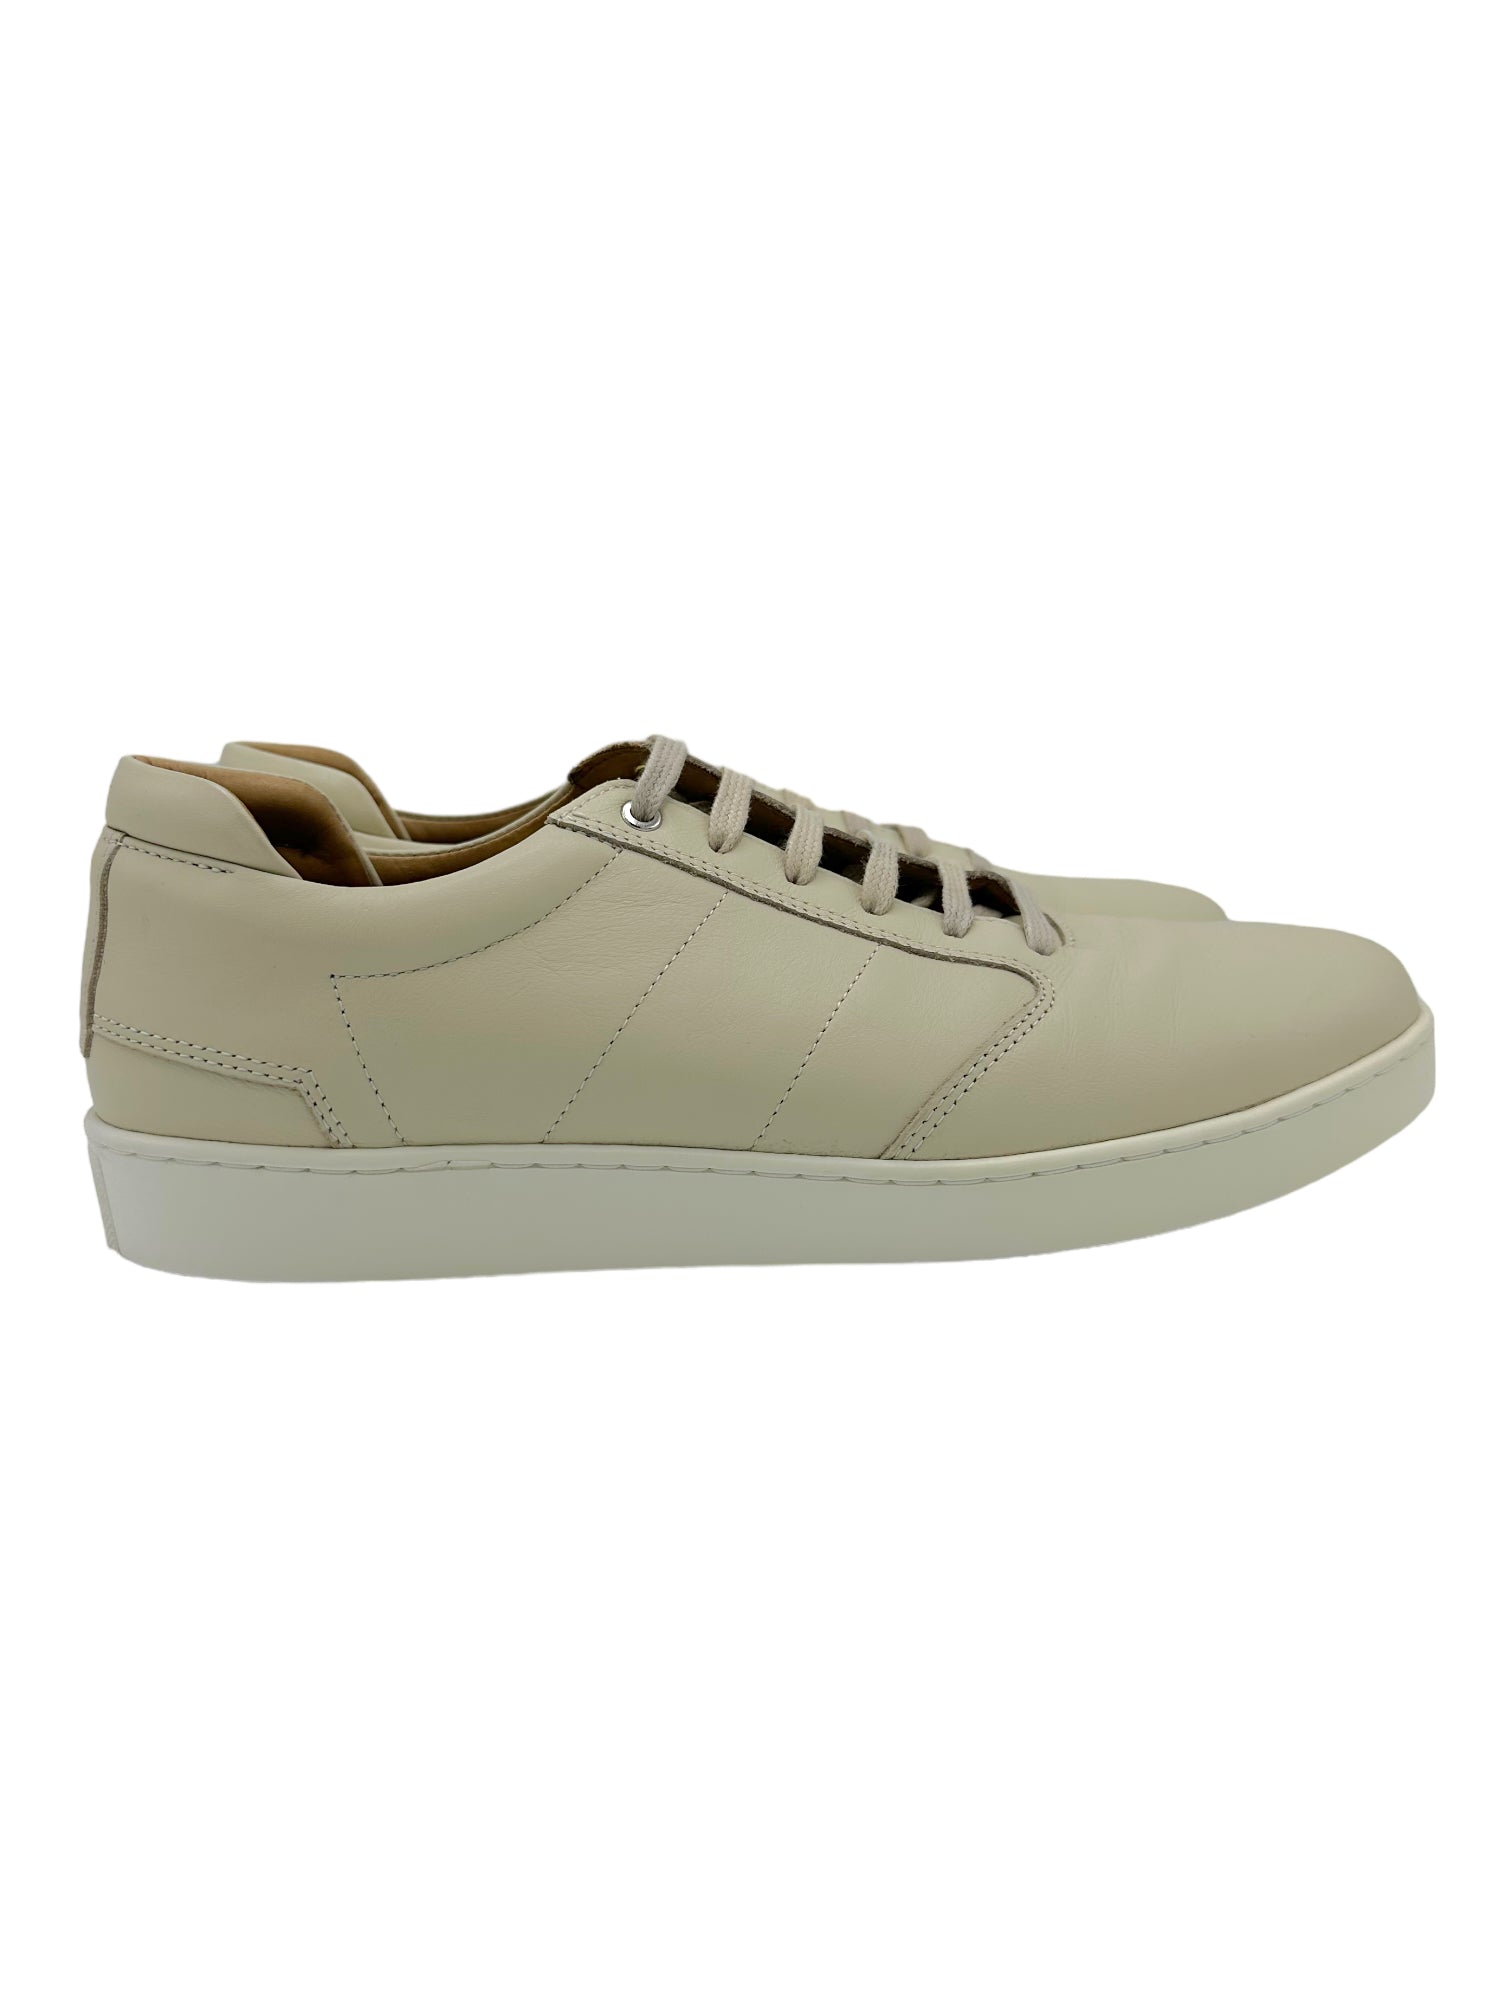 WANT Les Essentiels Cream Casual Sneaker - Genuine Design luxury consignment Calgary, Canada New and pre-owned clothing, shoes, accessories.